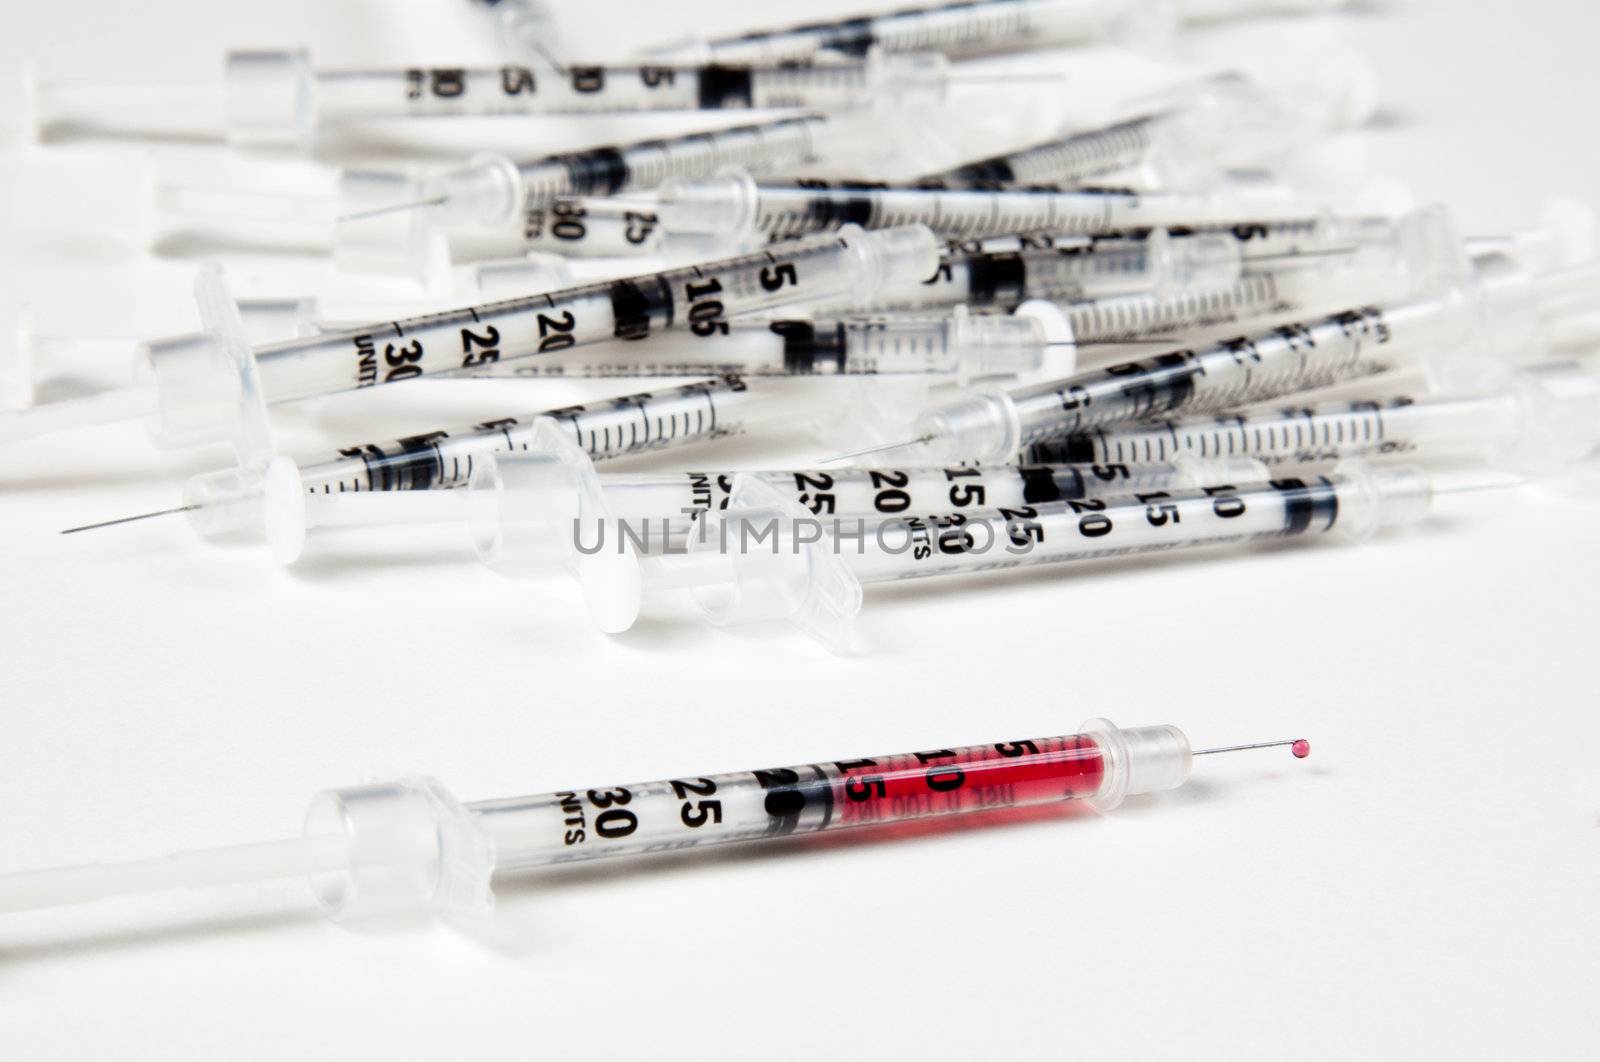 Pile of used syringes with a single filled one by steheap